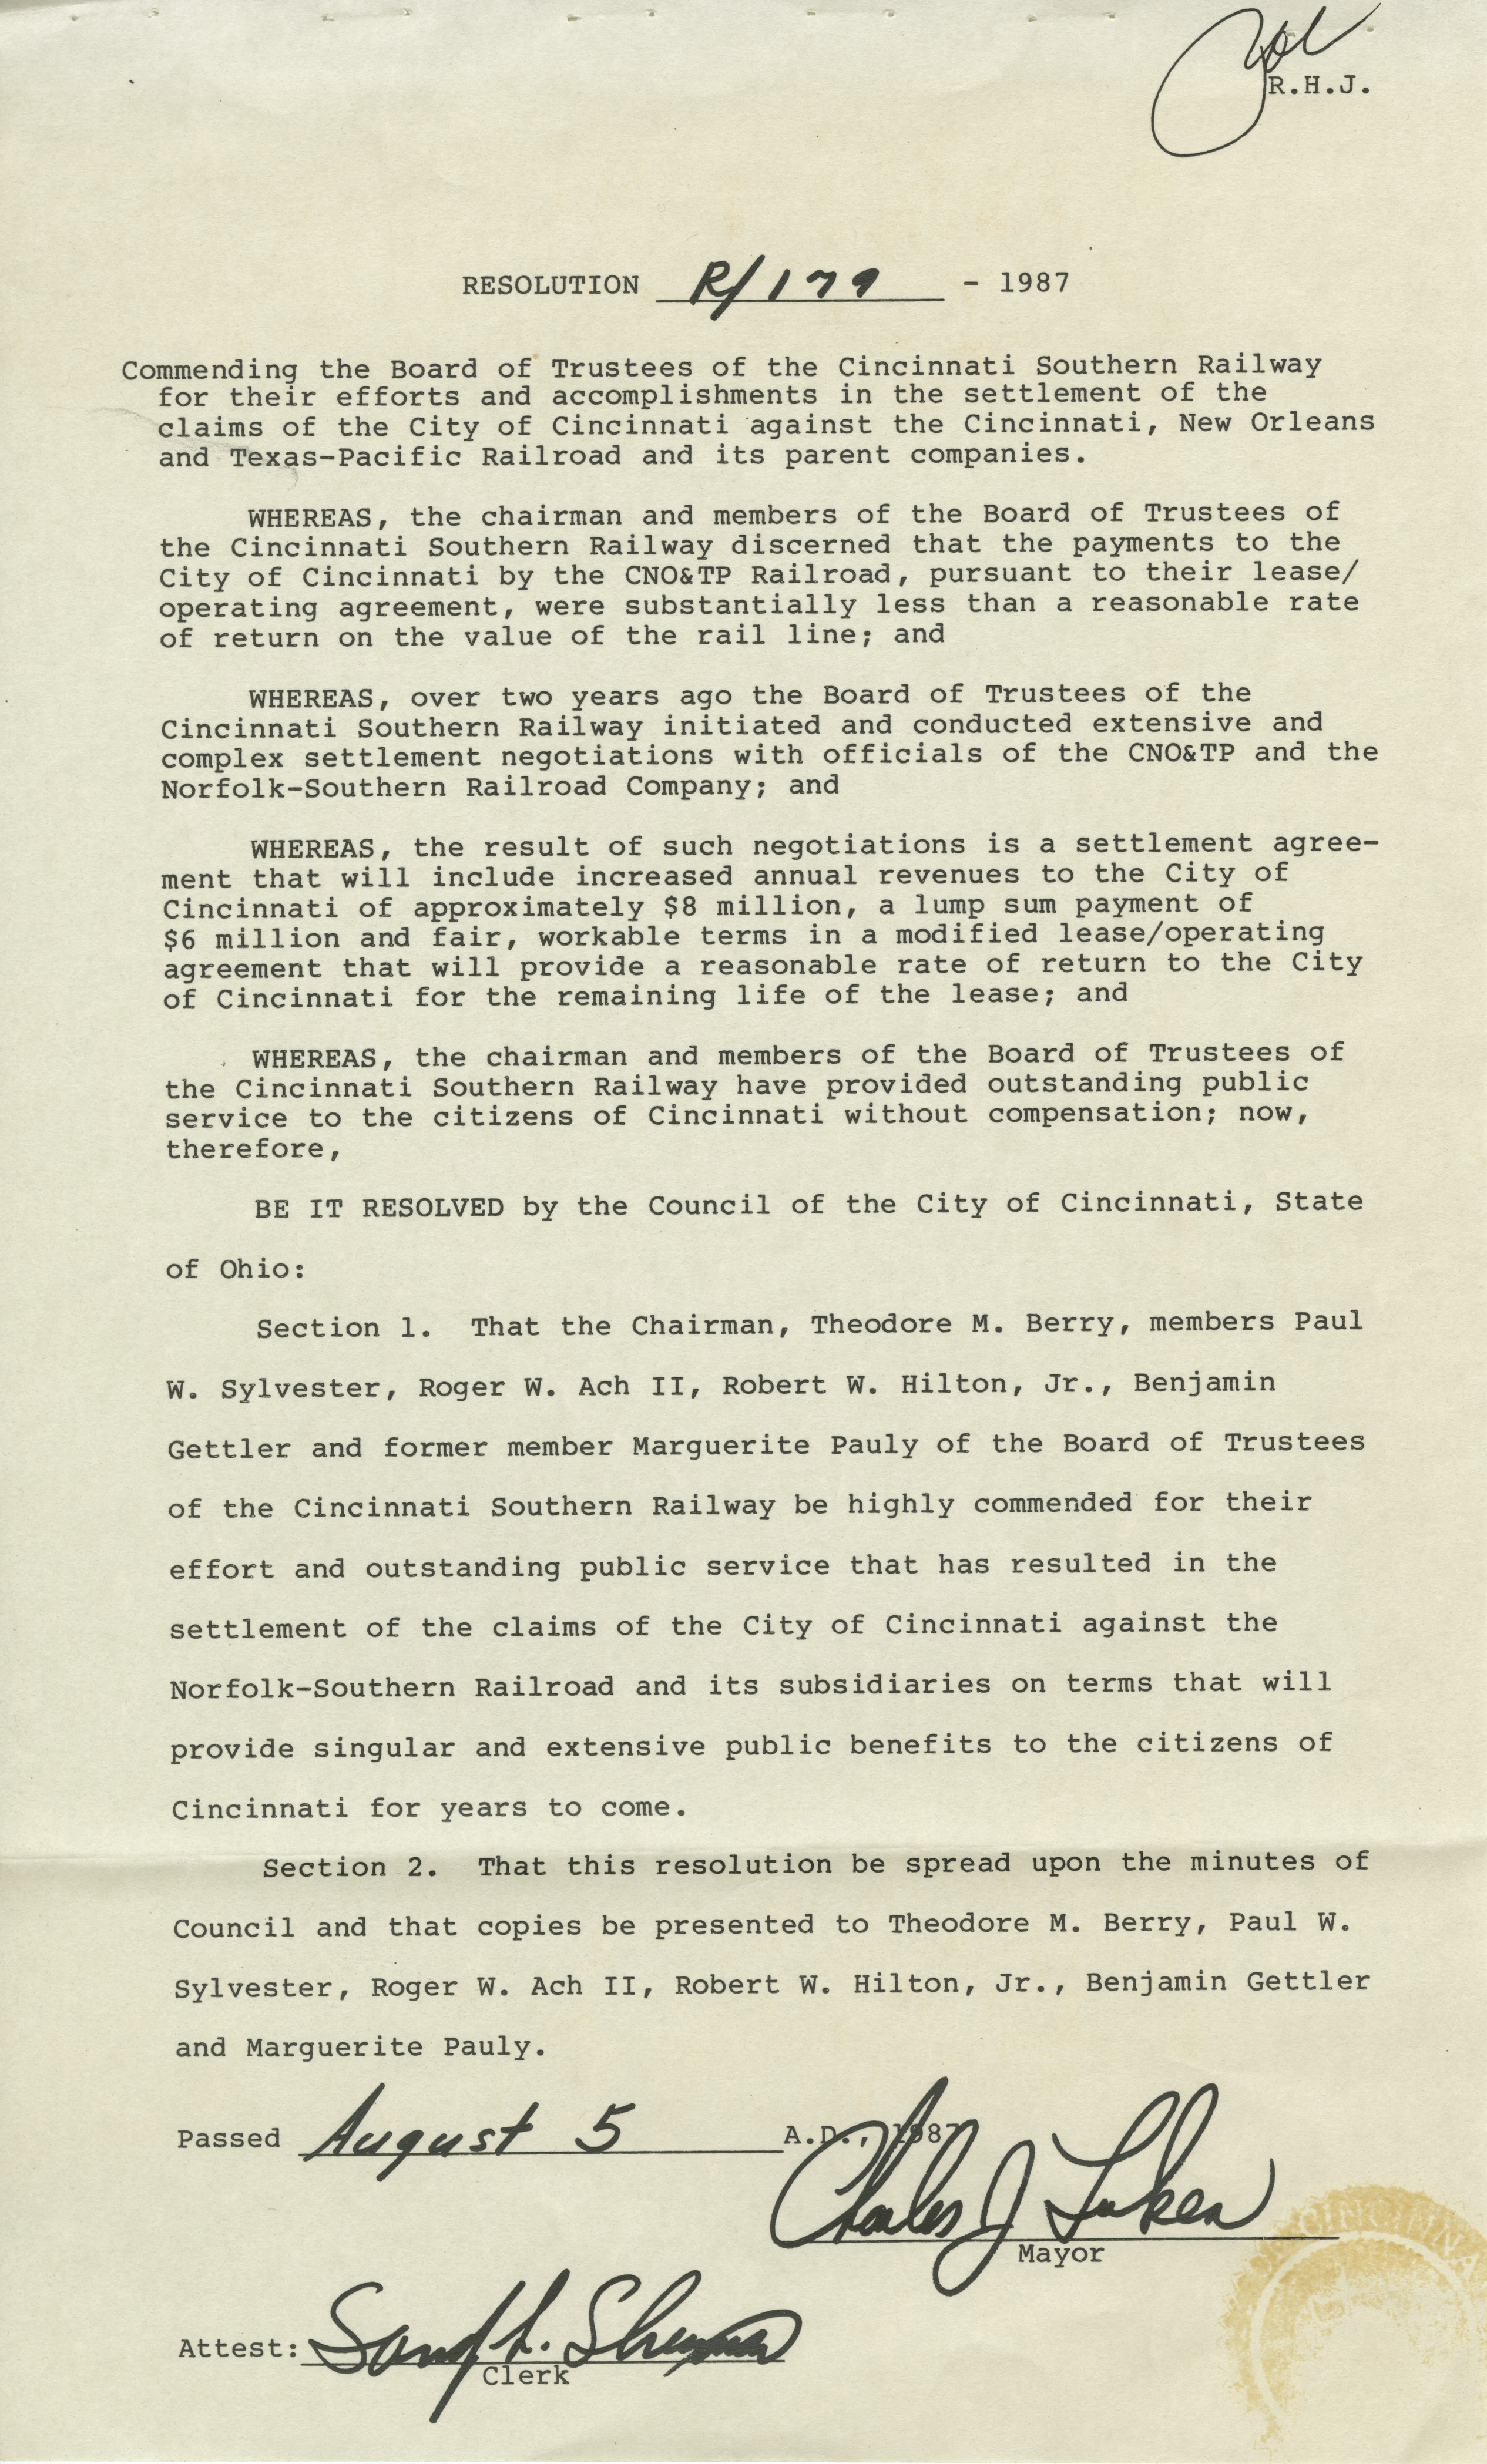 A 1987 Proclamation from Mayor Charlie Luken commending the Board of Trustees of the Cincinnati Southern Railway for their work in settling the city's claims against the Norfolk-Southern Railway Company.